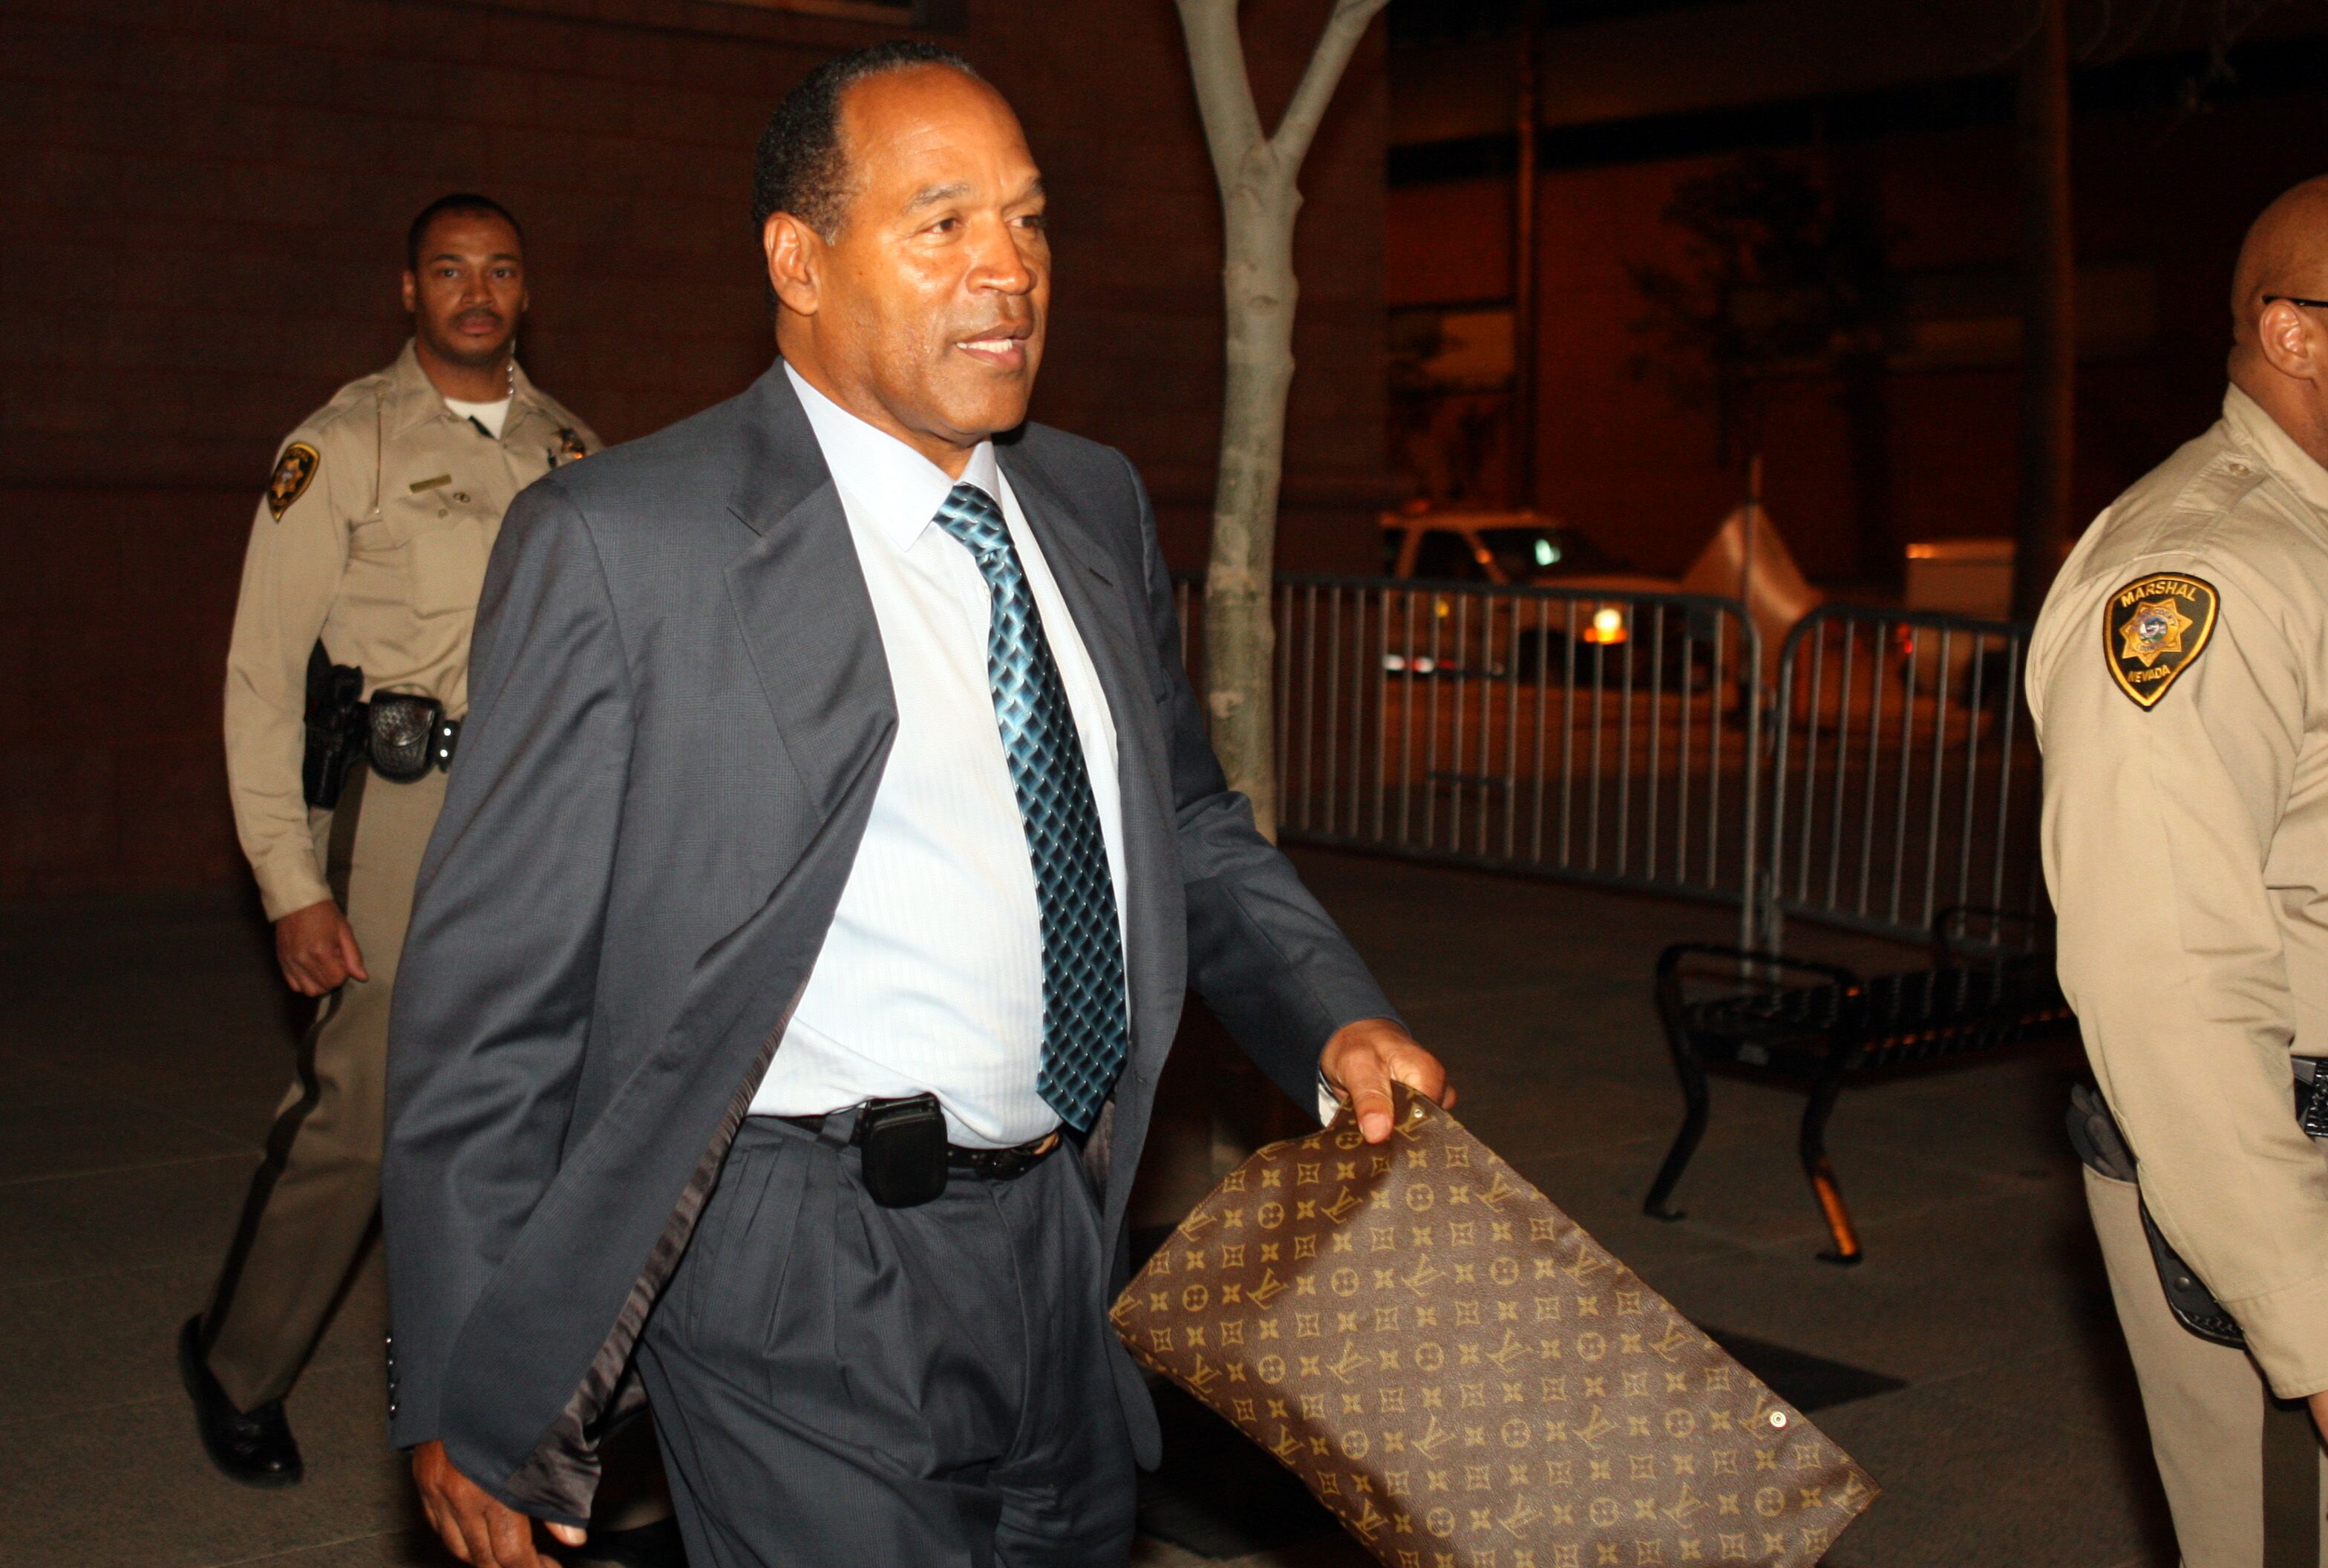 O.J. Simpson at the Clark County Regional Justice Center in 2008 | Source: Getty Images